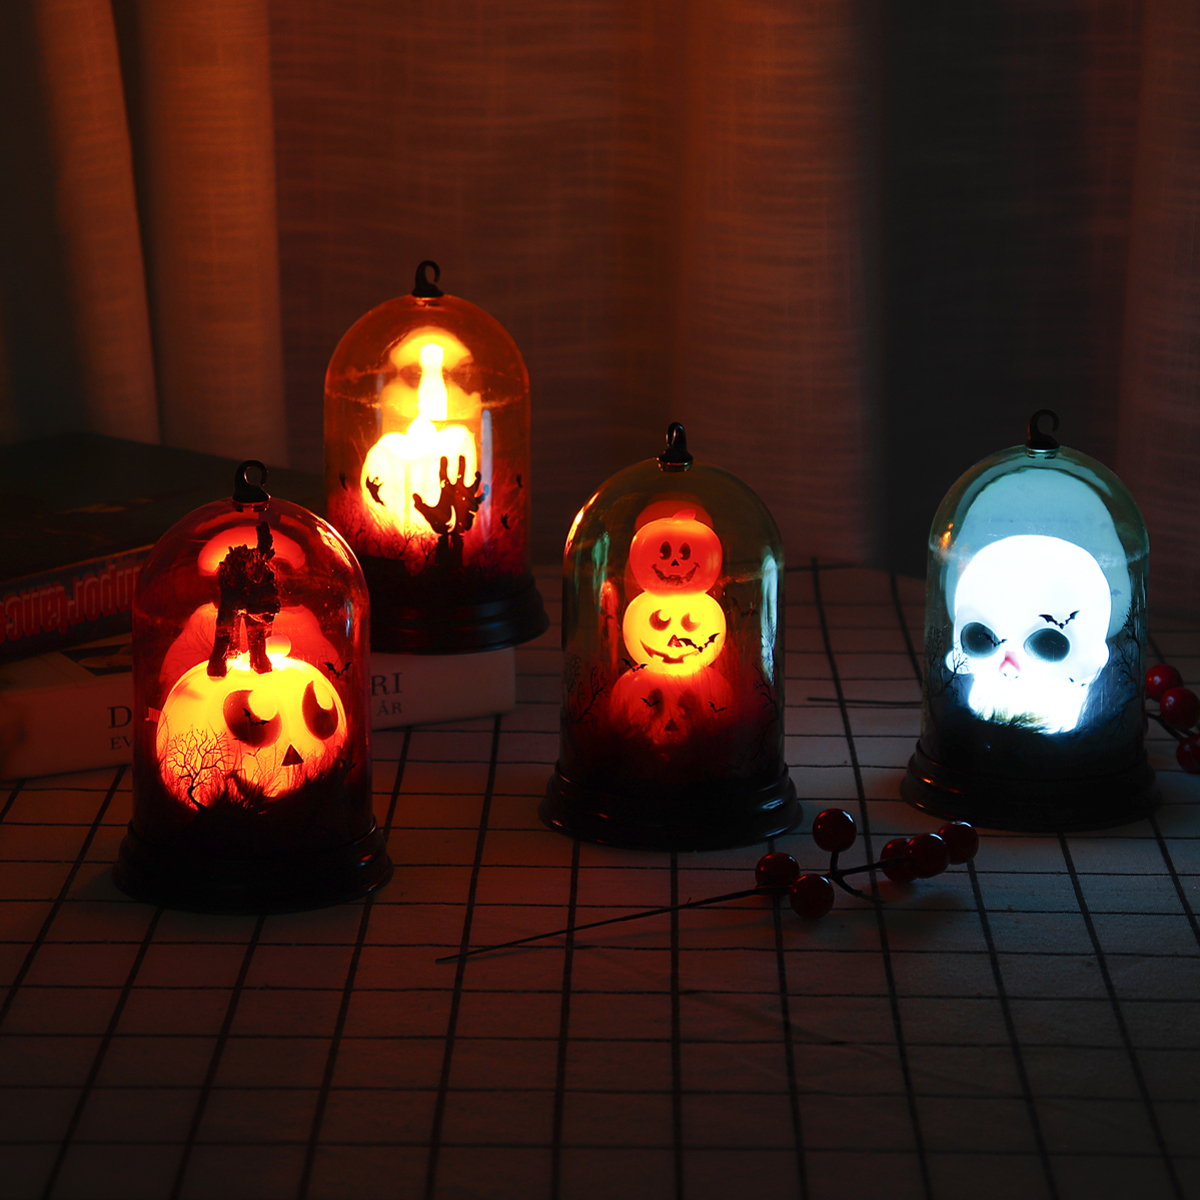 Witch-Pumpkin-Ghost-Skull-Halloween-LED-Night-Light-Hanging-Lantern-Lamp-for-Home-Party-Decor-1735526-2